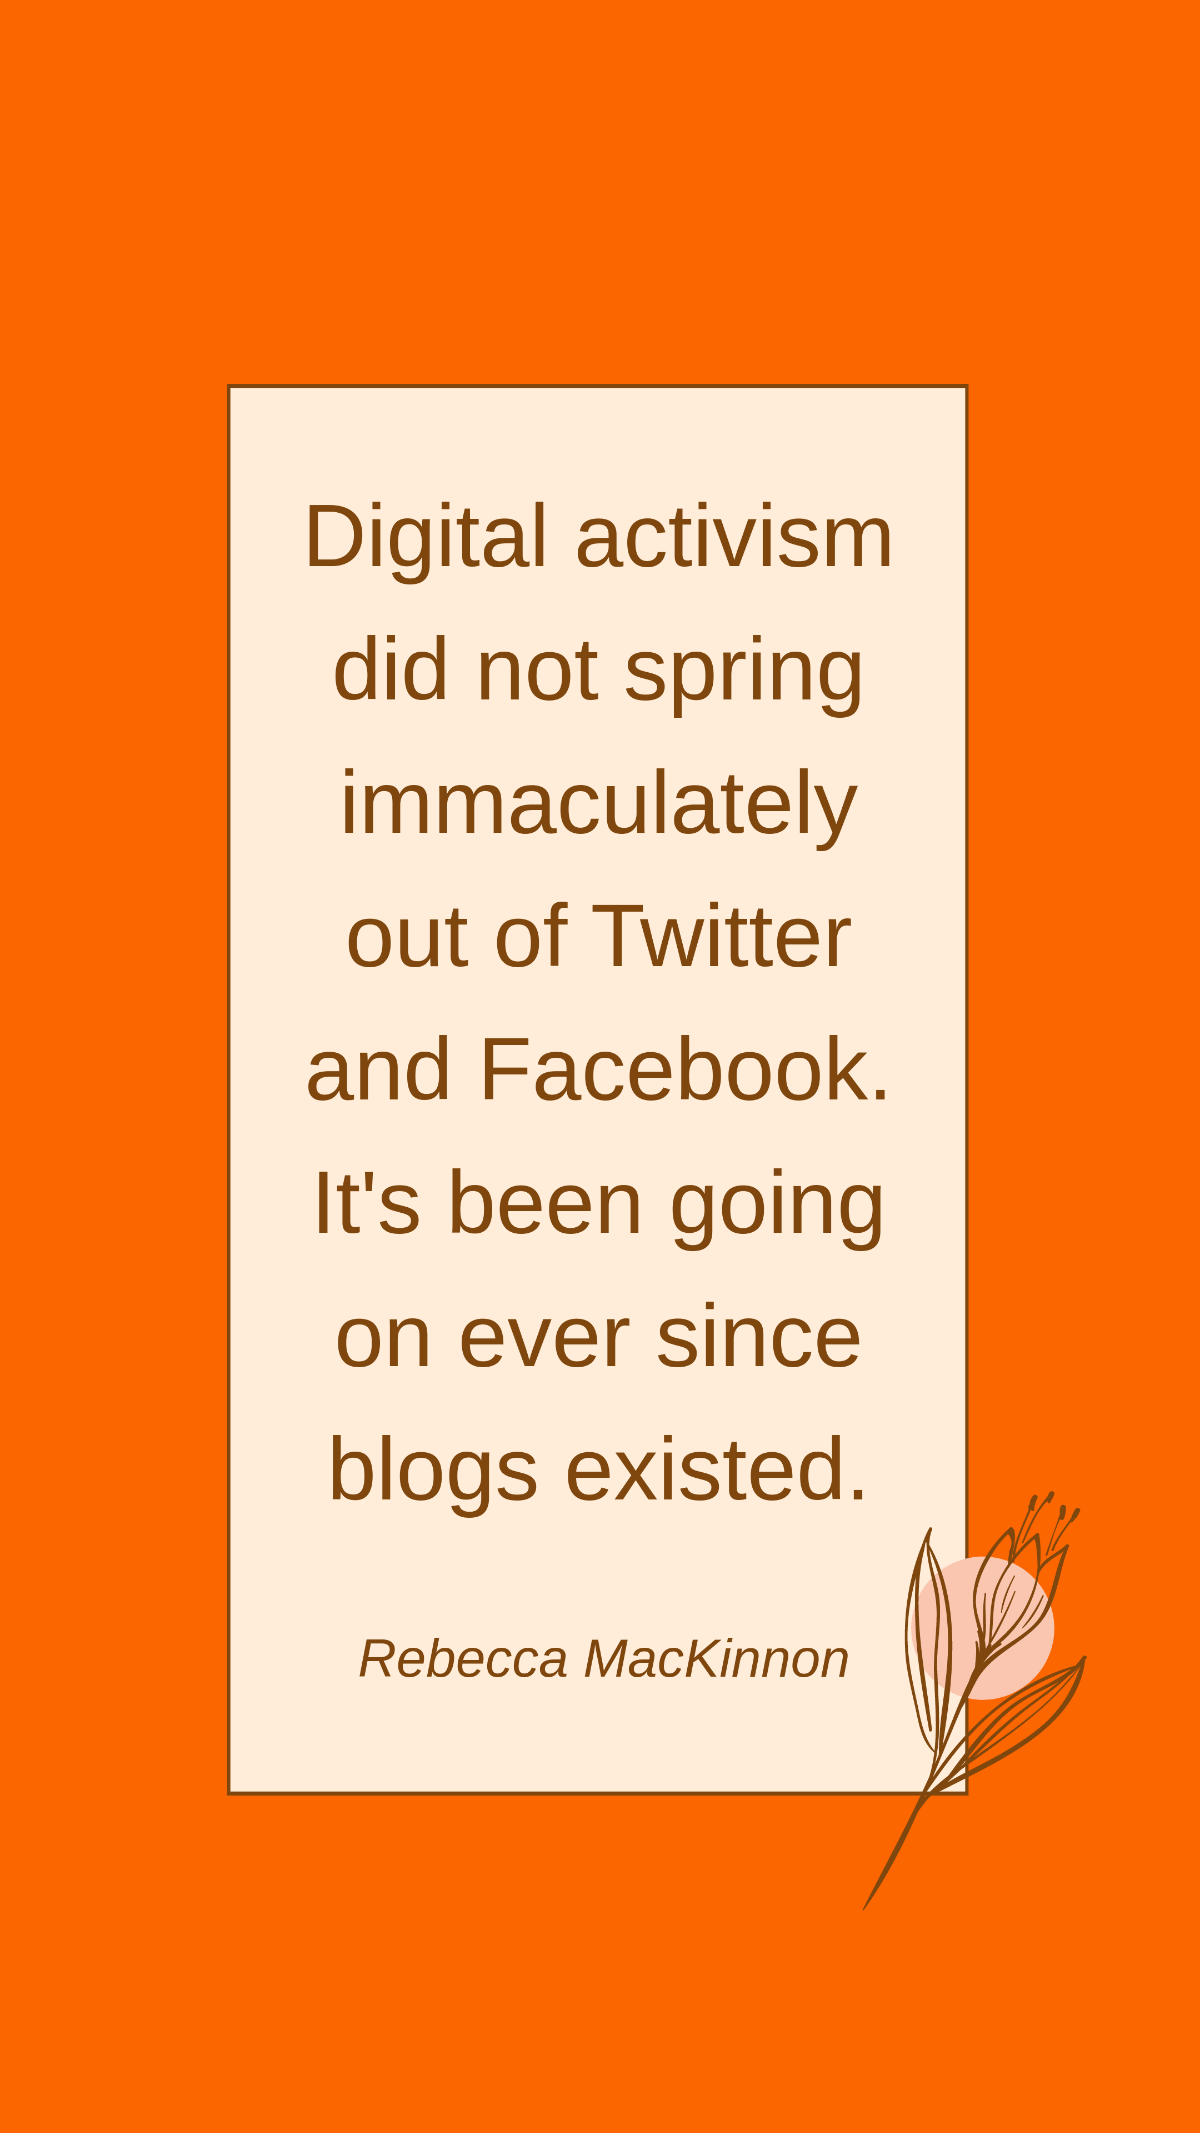 Free Rebecca MacKinnon - Digital activism did not spring immaculately out of Twitter and Facebook. It's been going on ever since blogs existed. Template